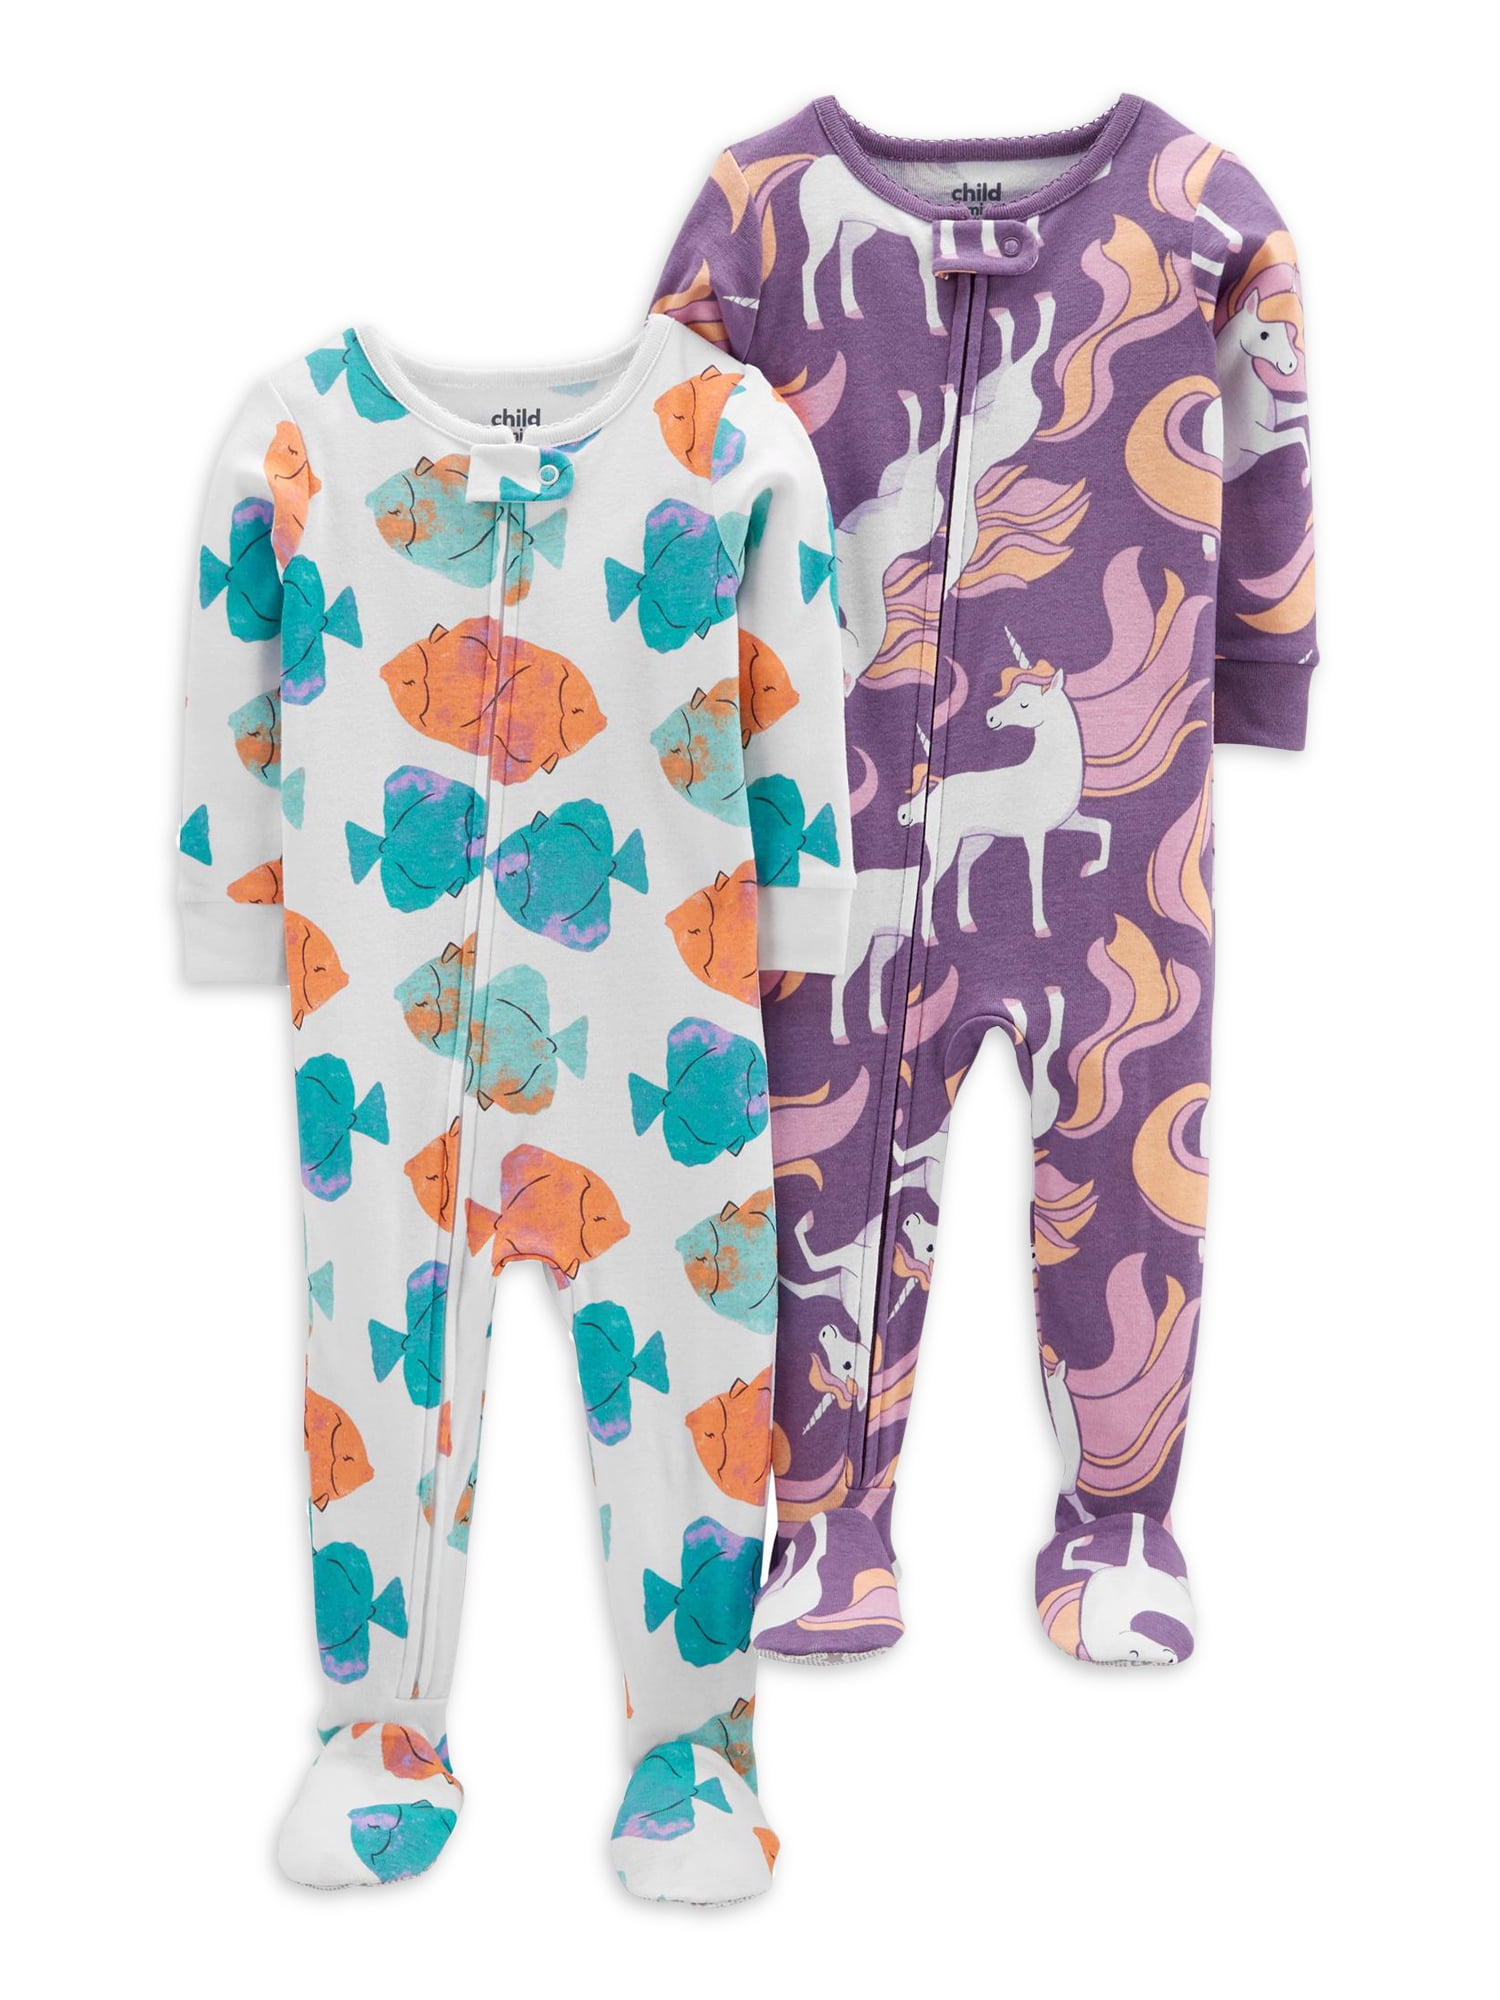 Carters Baby Boys 2-Pack Cotton Footed Pajamas 